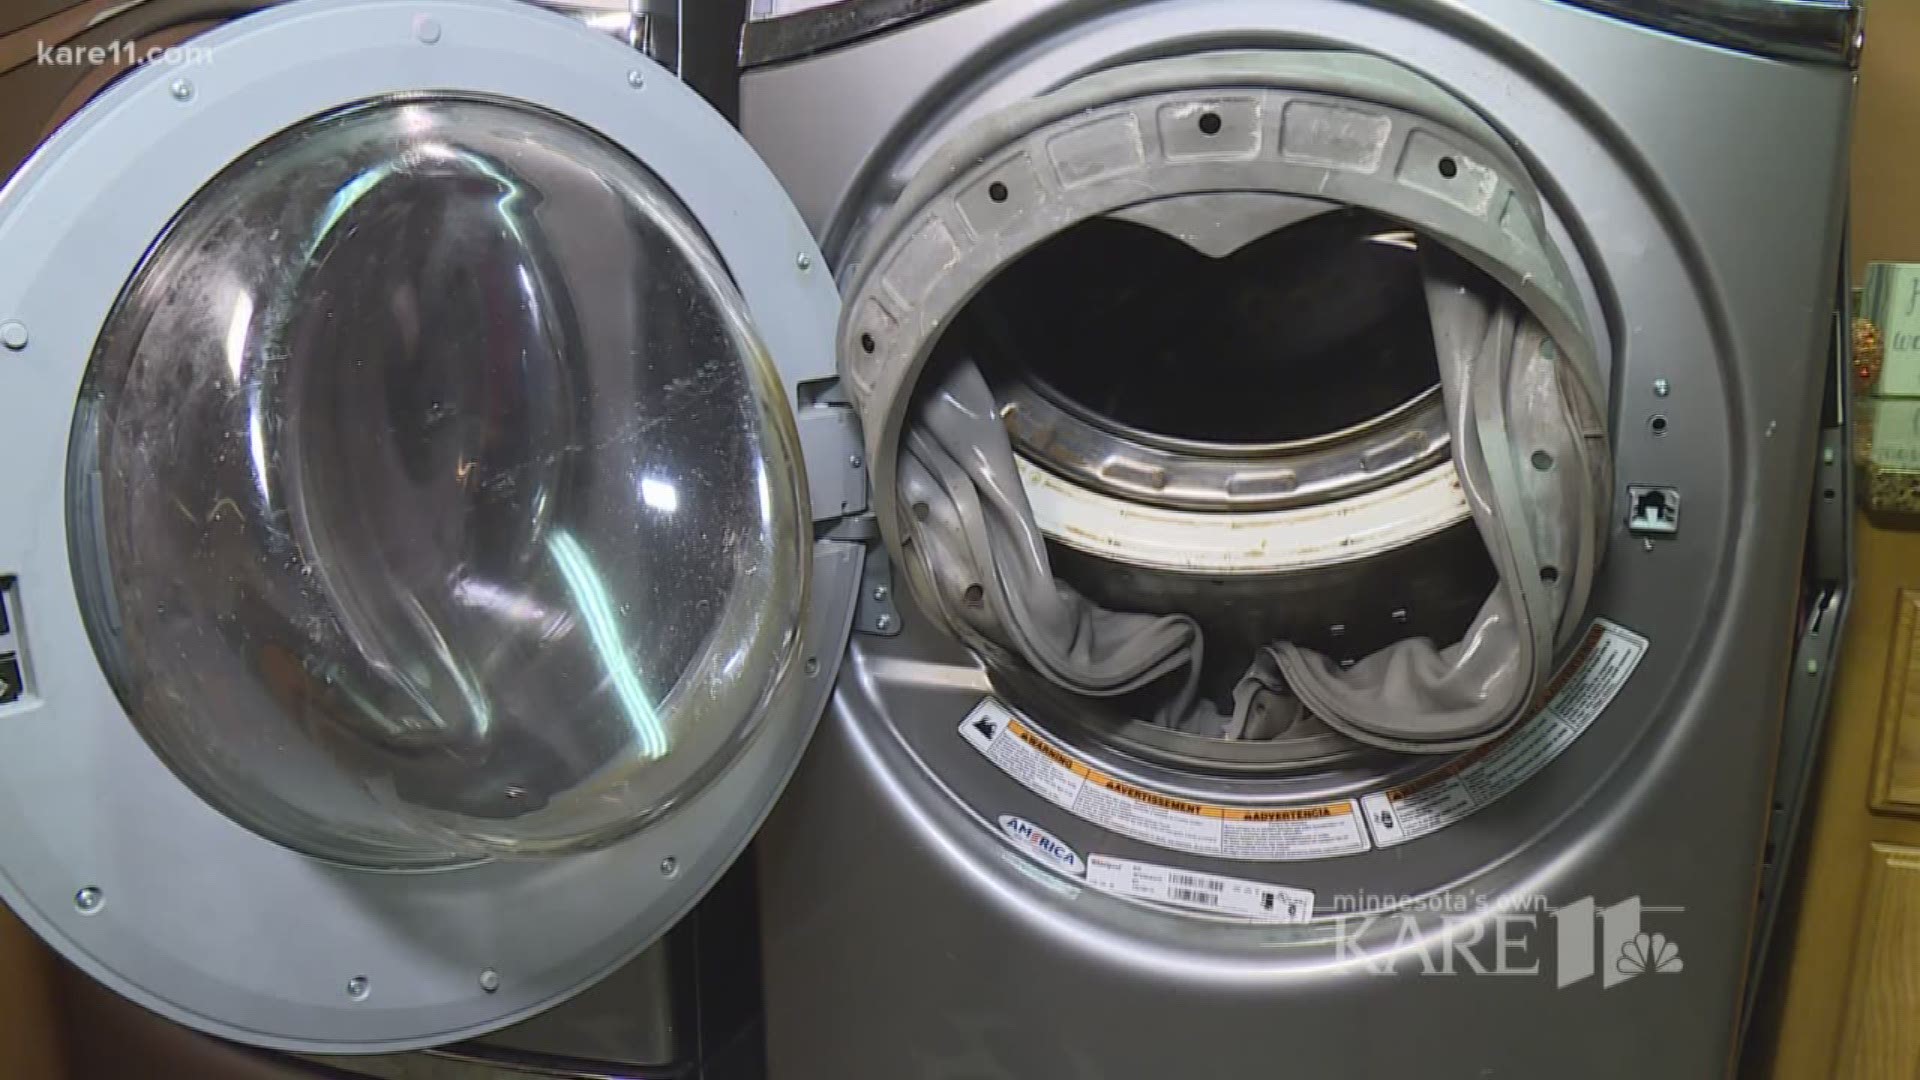 A central Minnesota mother of five says her Whirlpool Duet washing machine exploded during the spin cycle, firing ball bearings and other parts at her, knocking her unconscious and giving her a concussion. http://kare11.tv/2hxCOZN